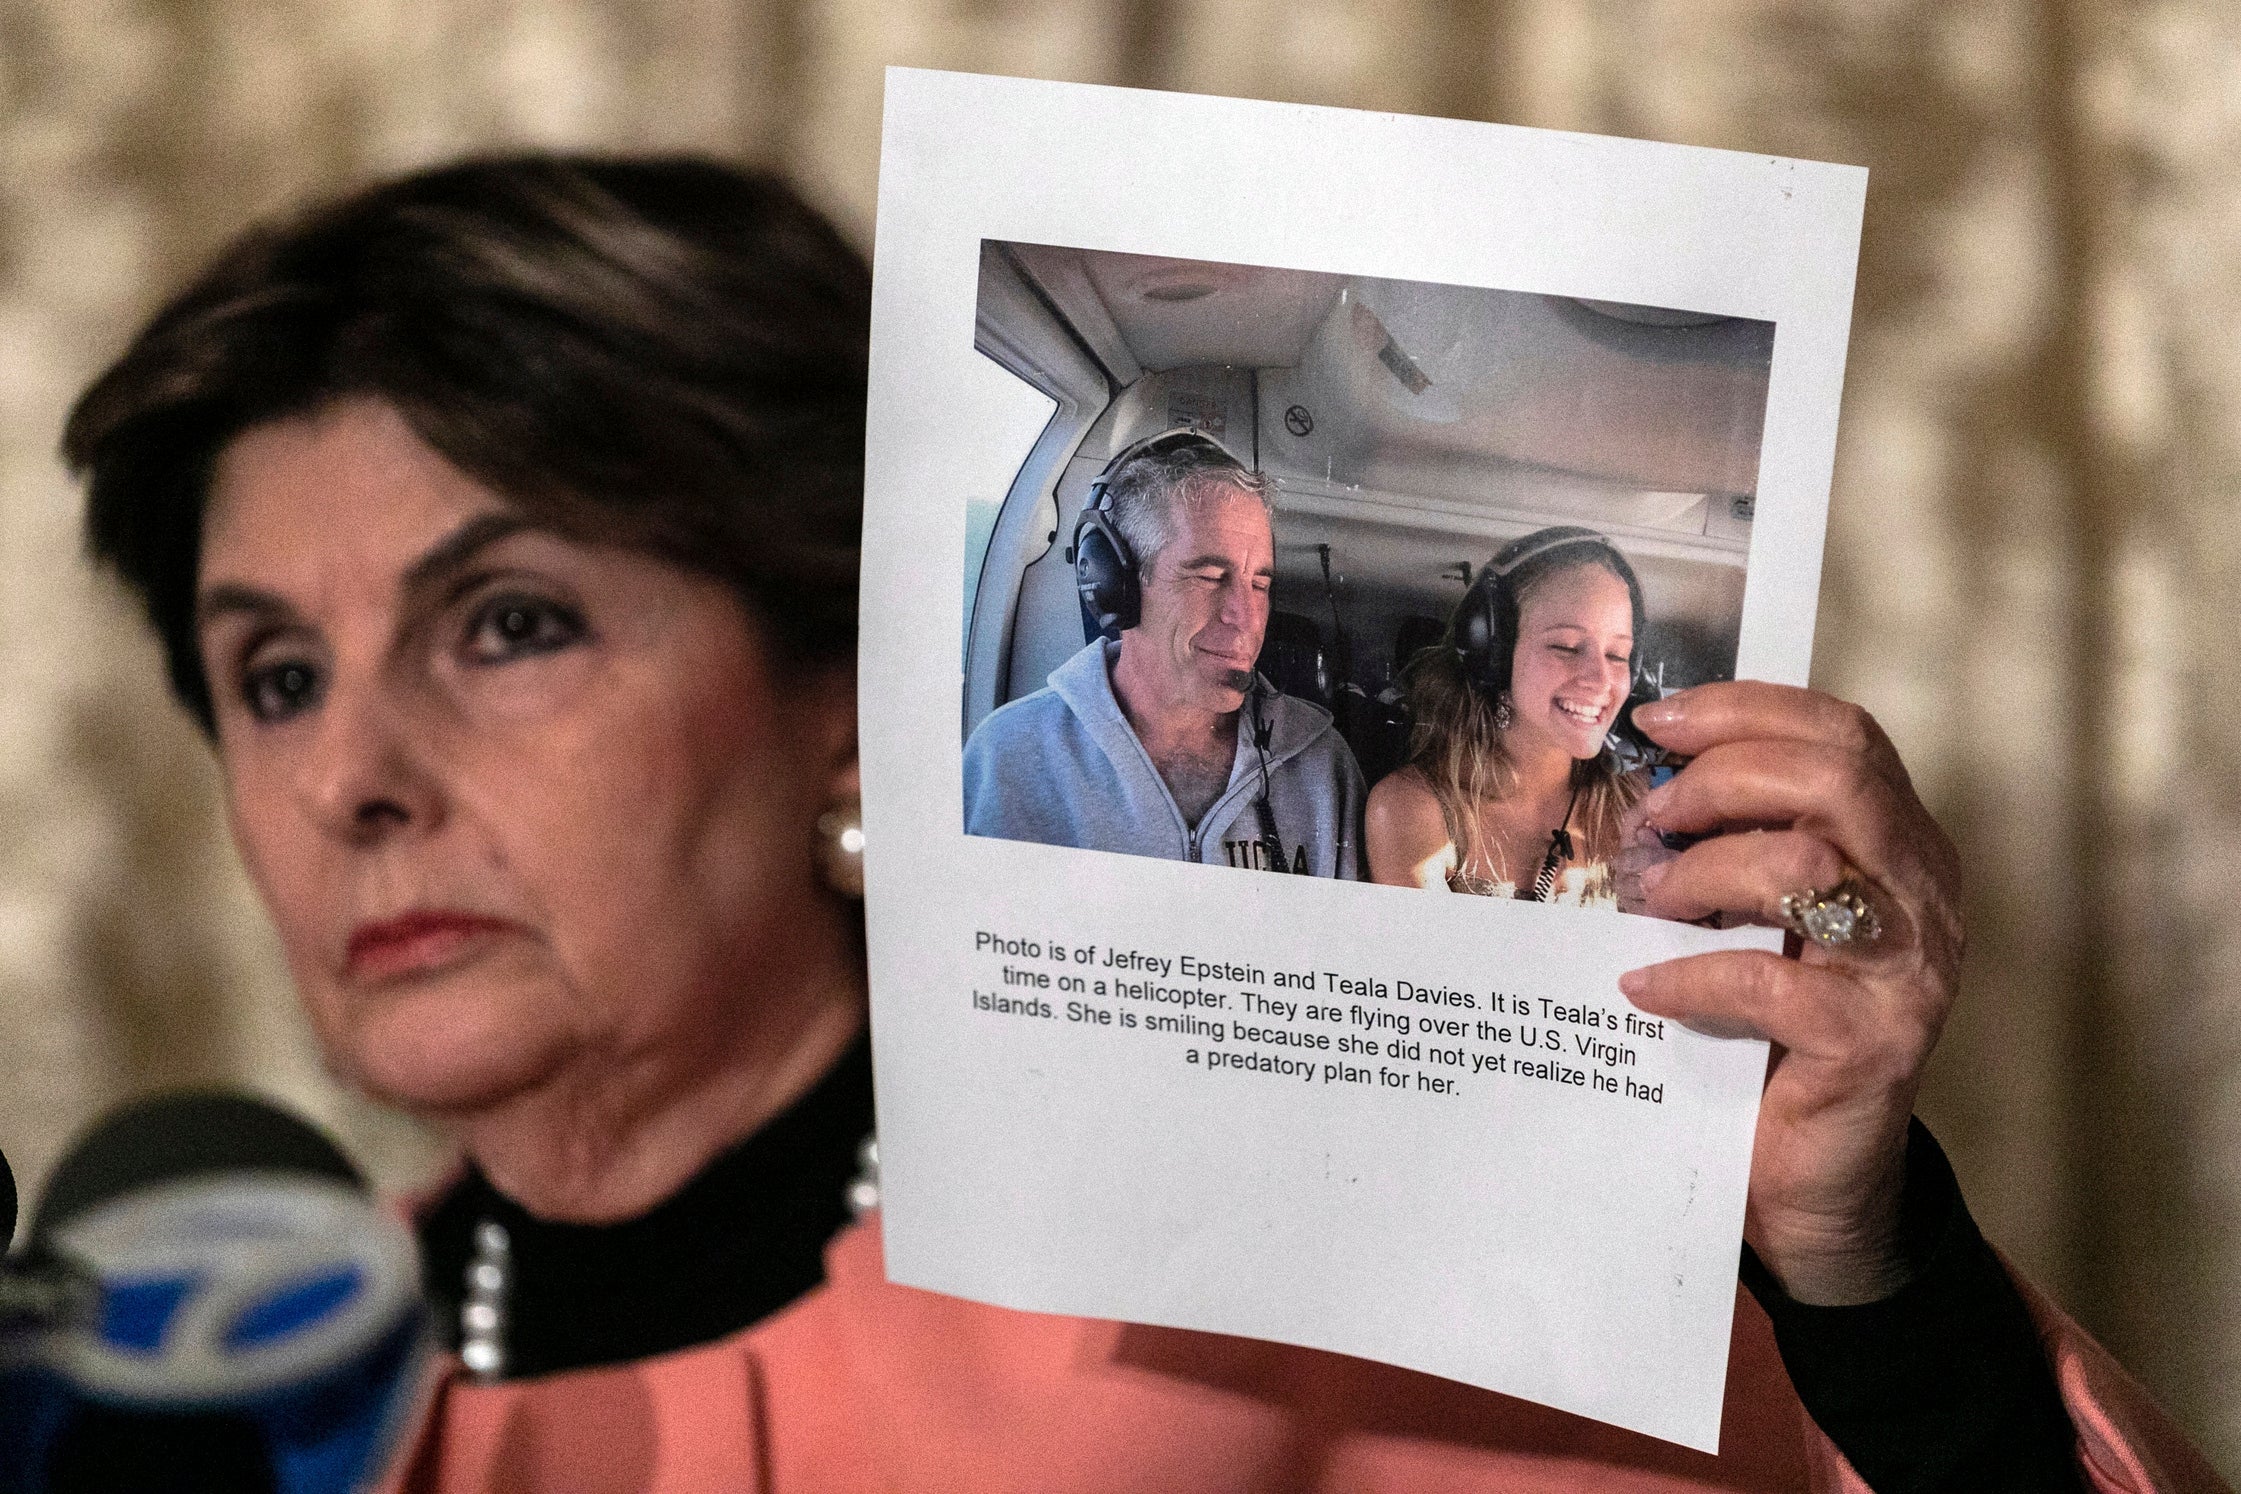 Gloria Allred shows a press conference a photo of Jeffrey Epstein and her client Teala Davies